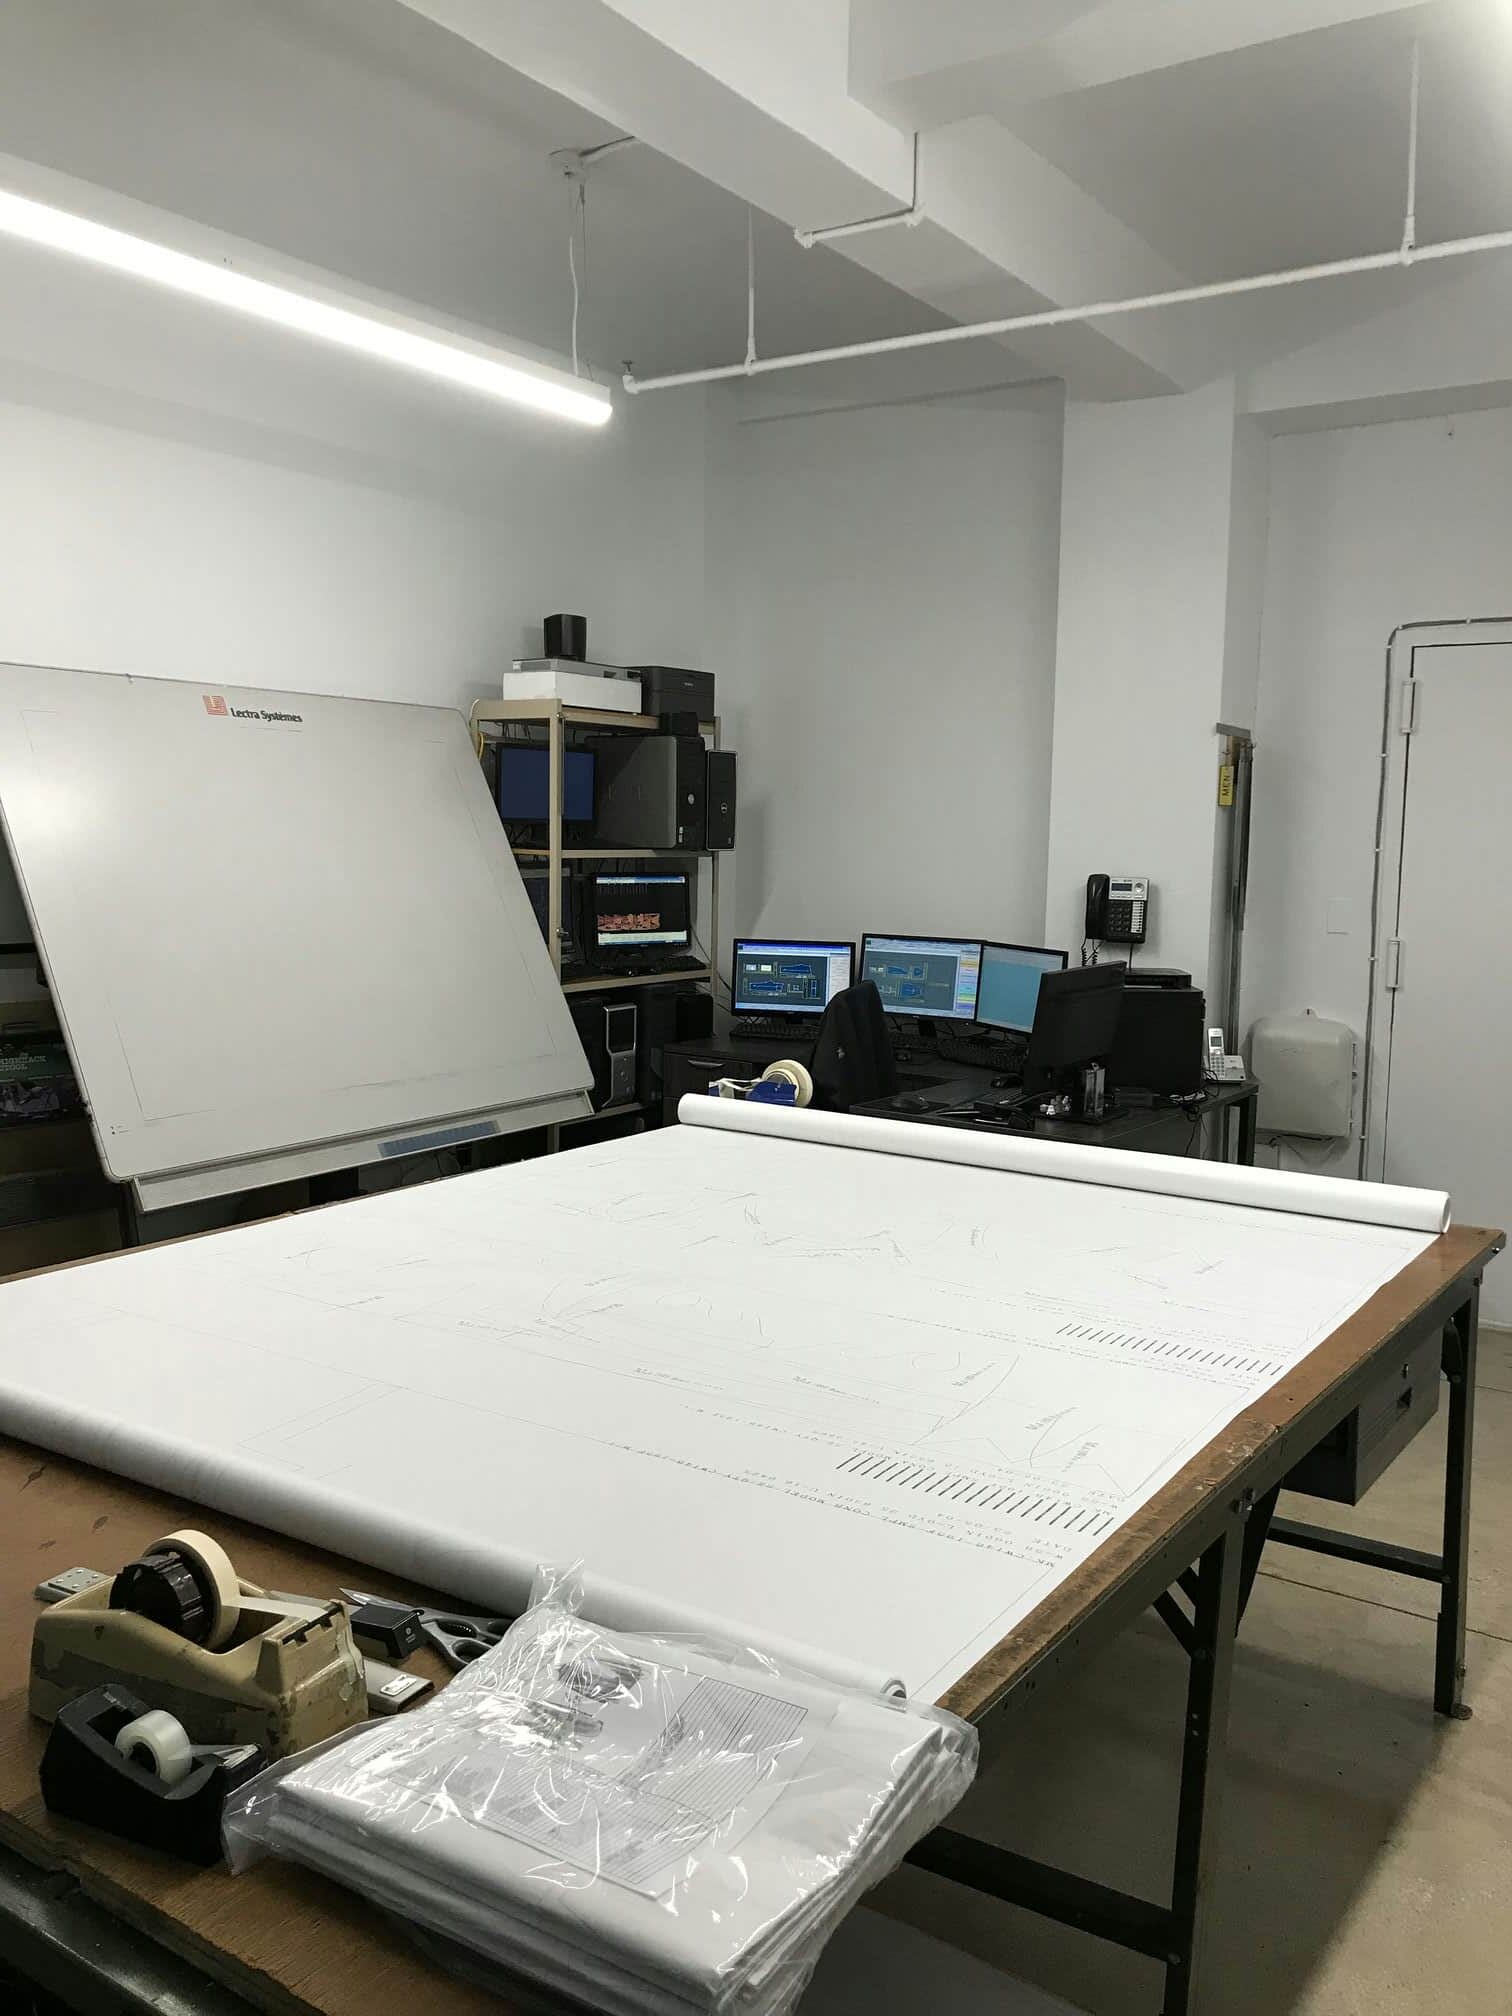 Top Notch Pattern NYC office showing Lectra systems digitizer table, printed marker on table, with digitizing and grading software open on computers on the background near servers.